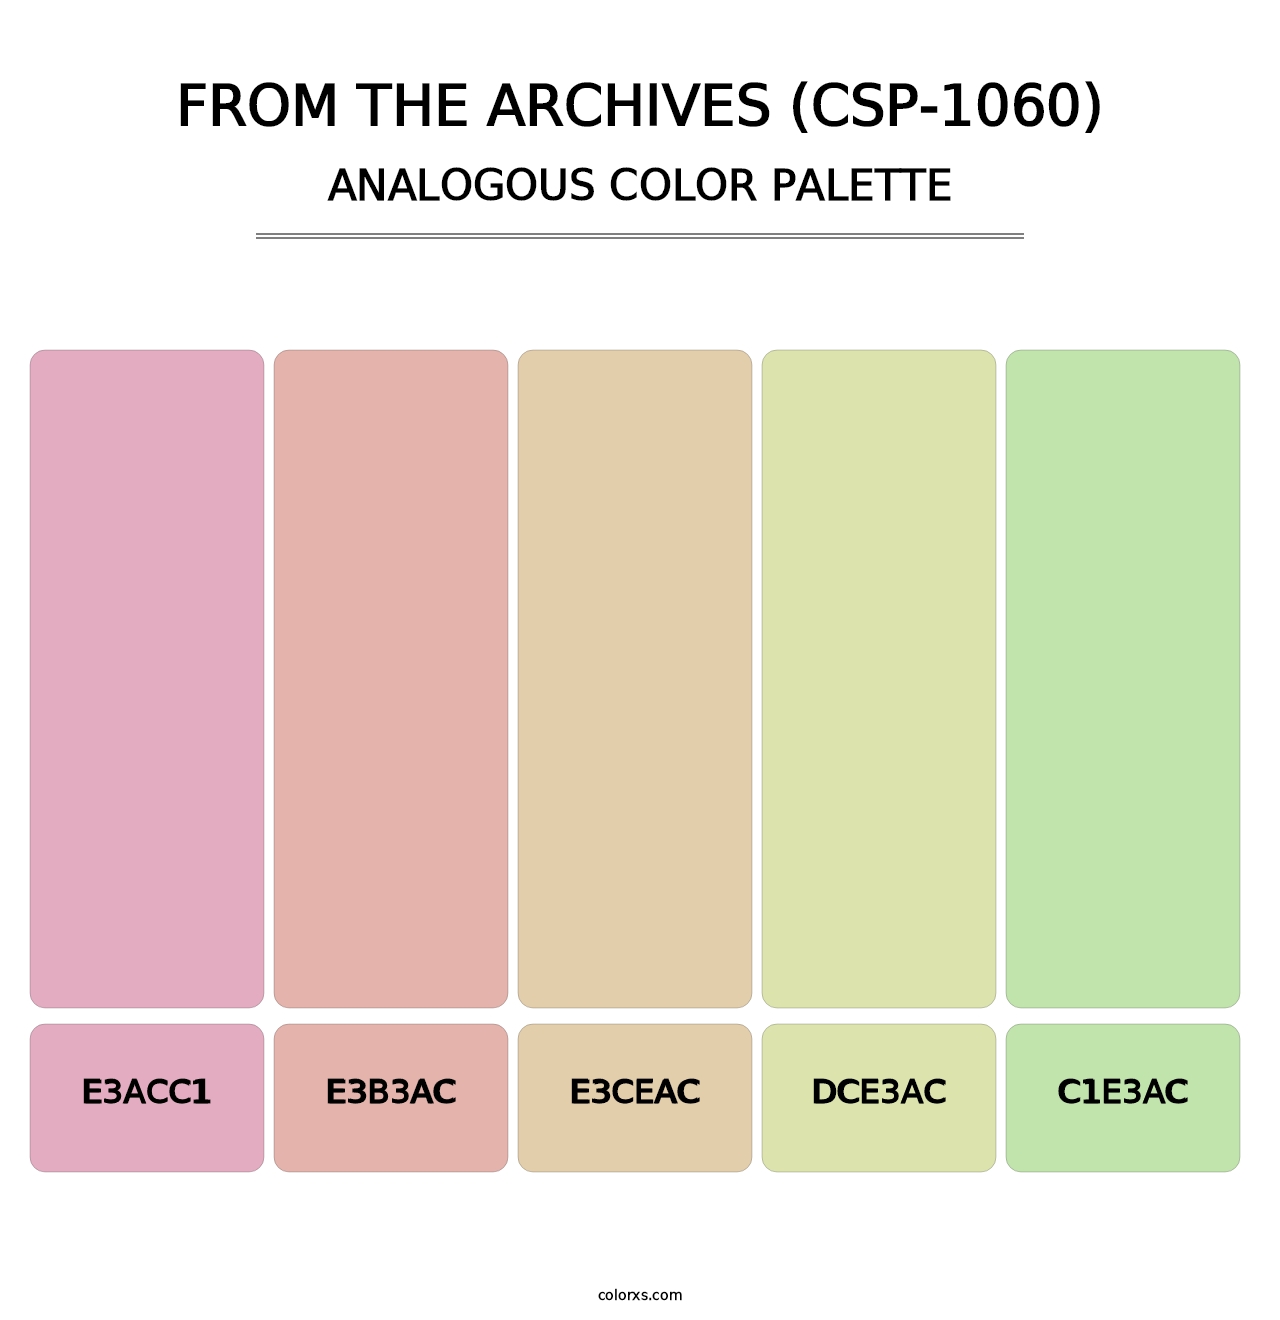 From the Archives (CSP-1060) - Analogous Color Palette